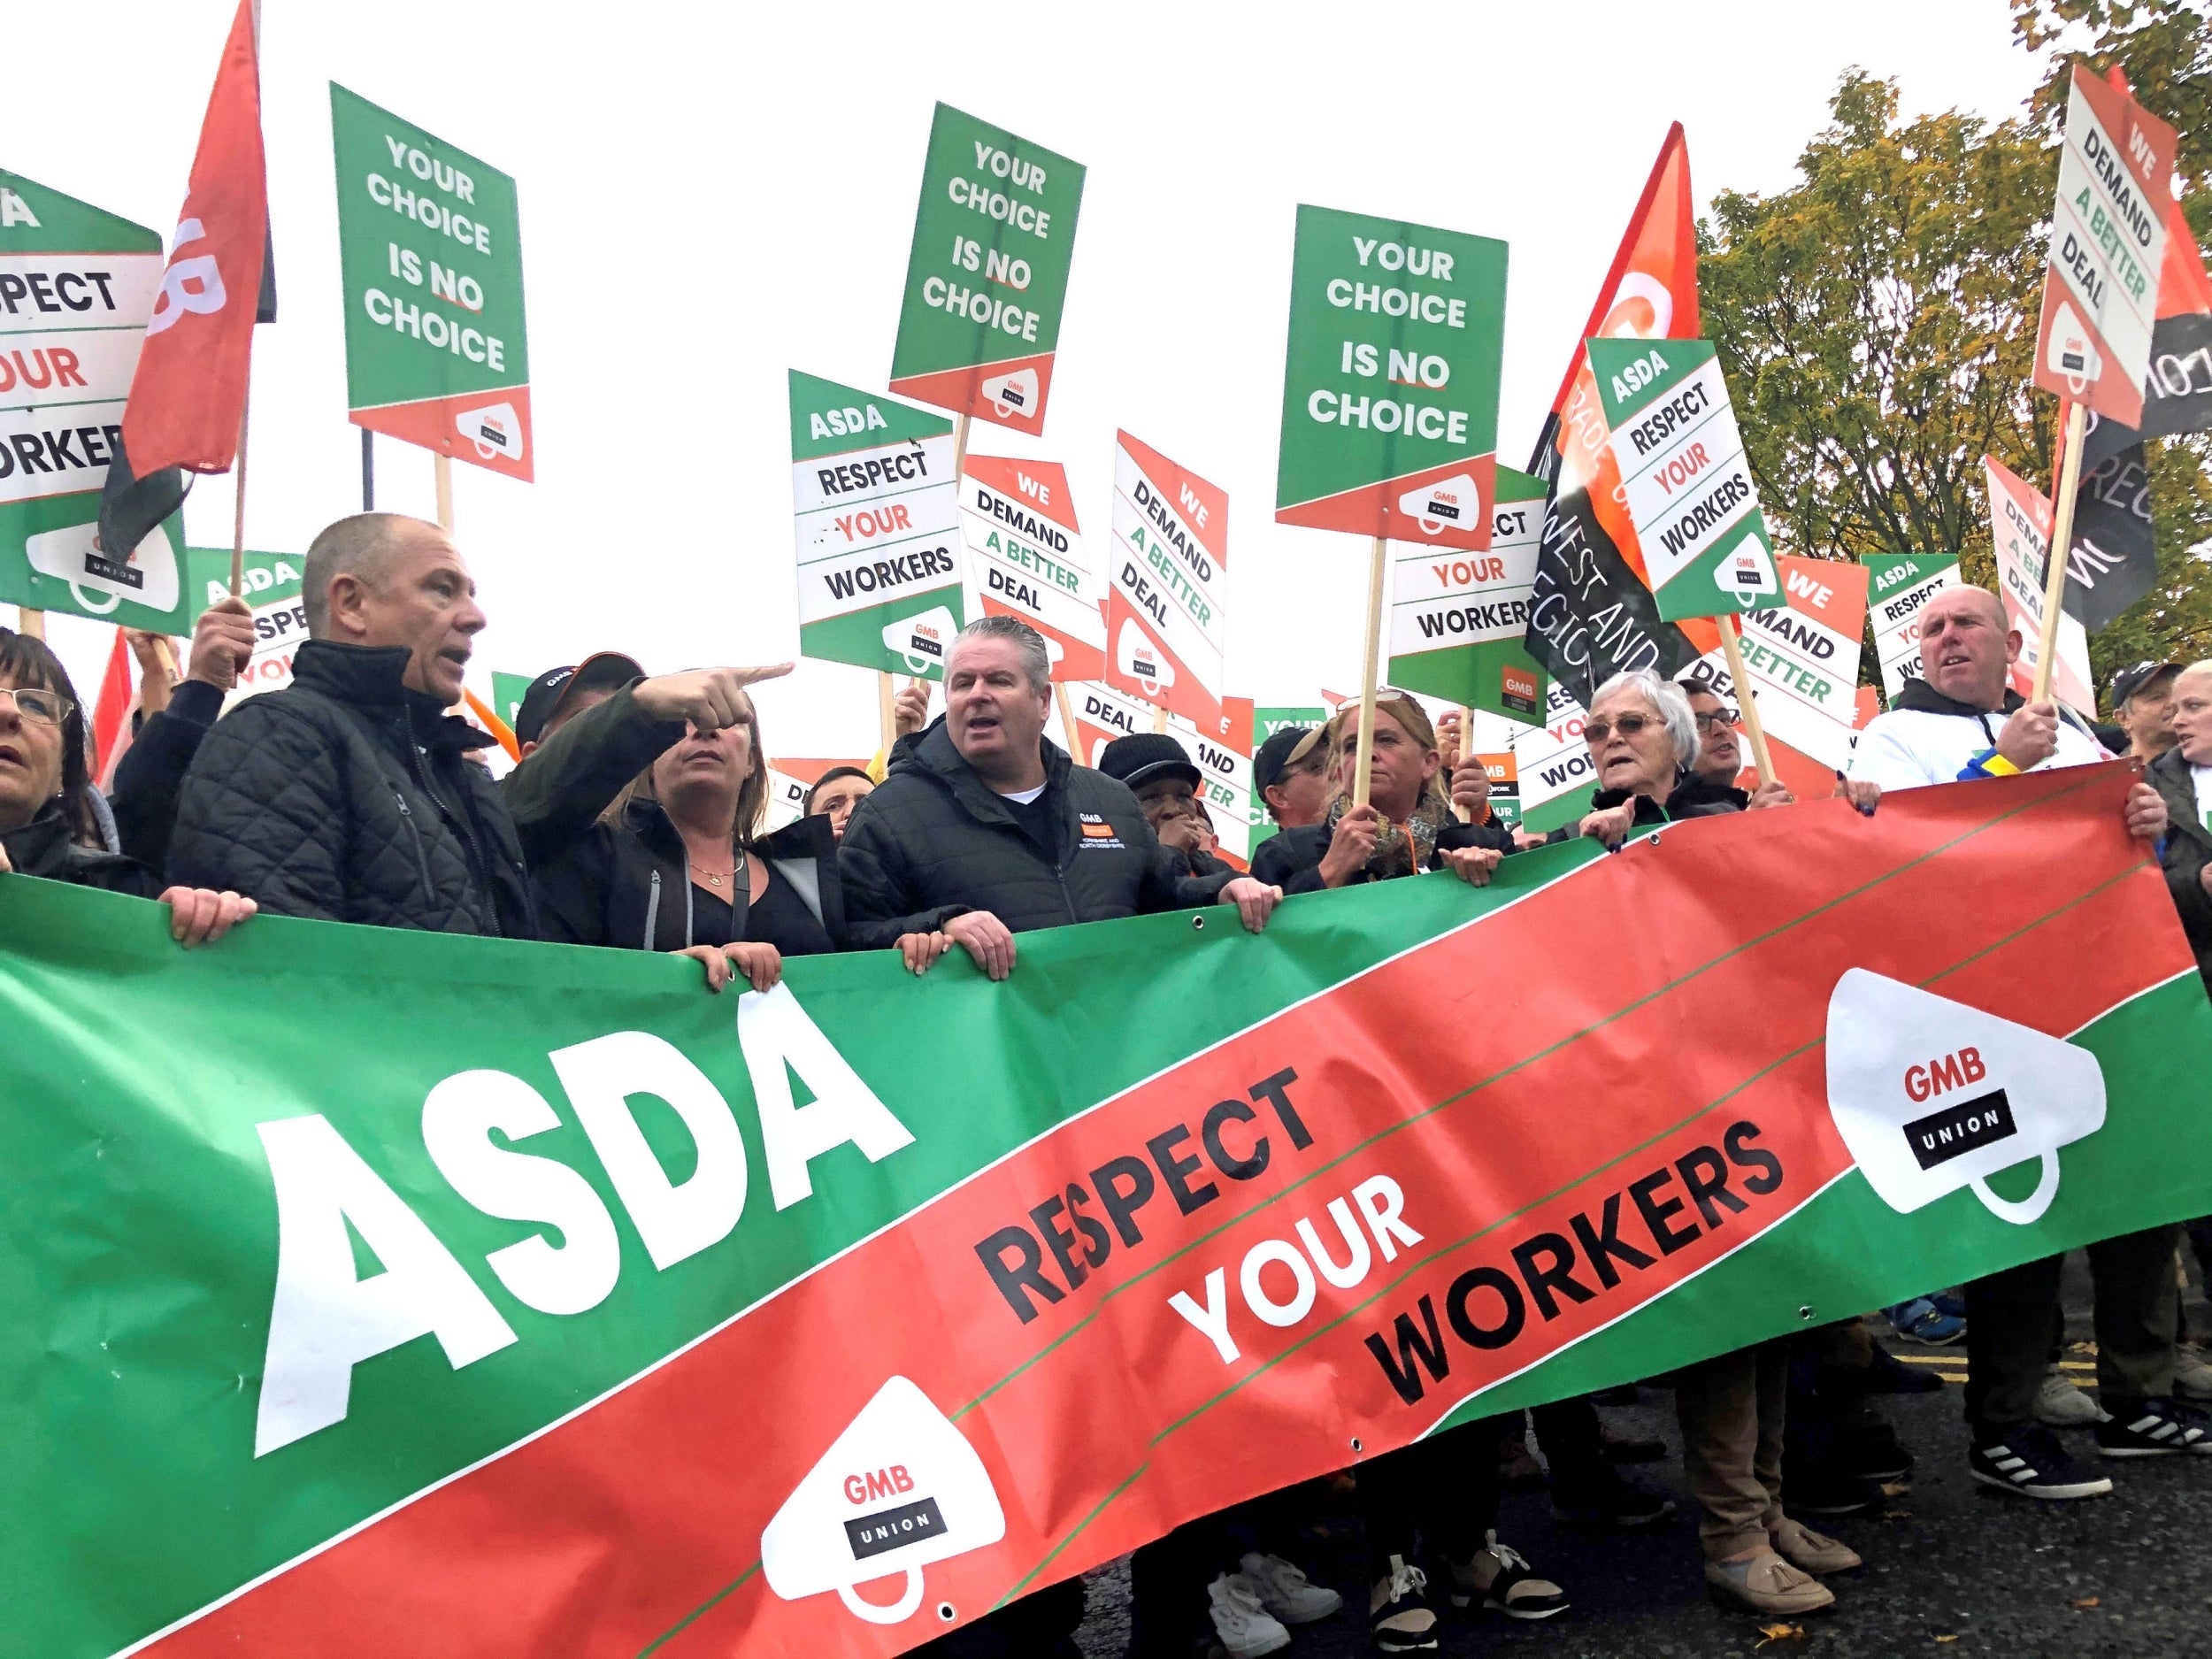 Workers on Asda’s basic hourly rate will get a pay rise of 18p per hour